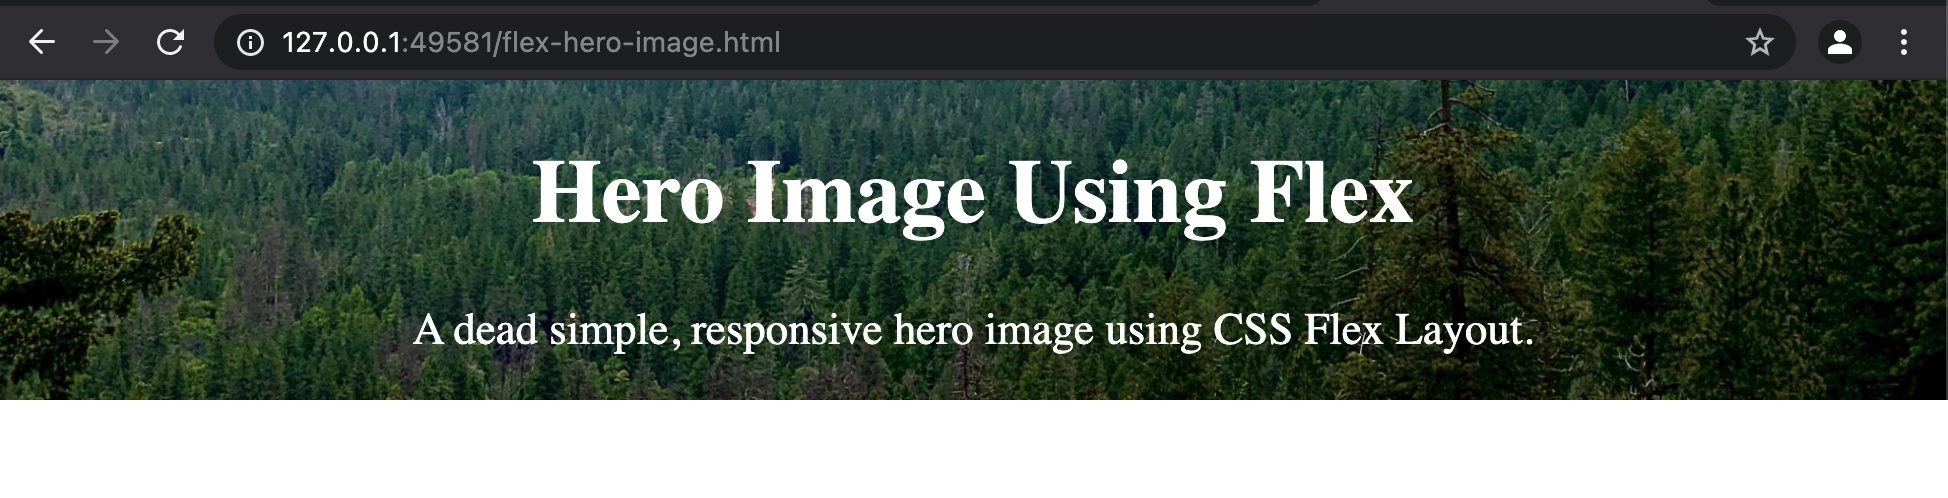 Pure CSS hero image without using responsive framework.